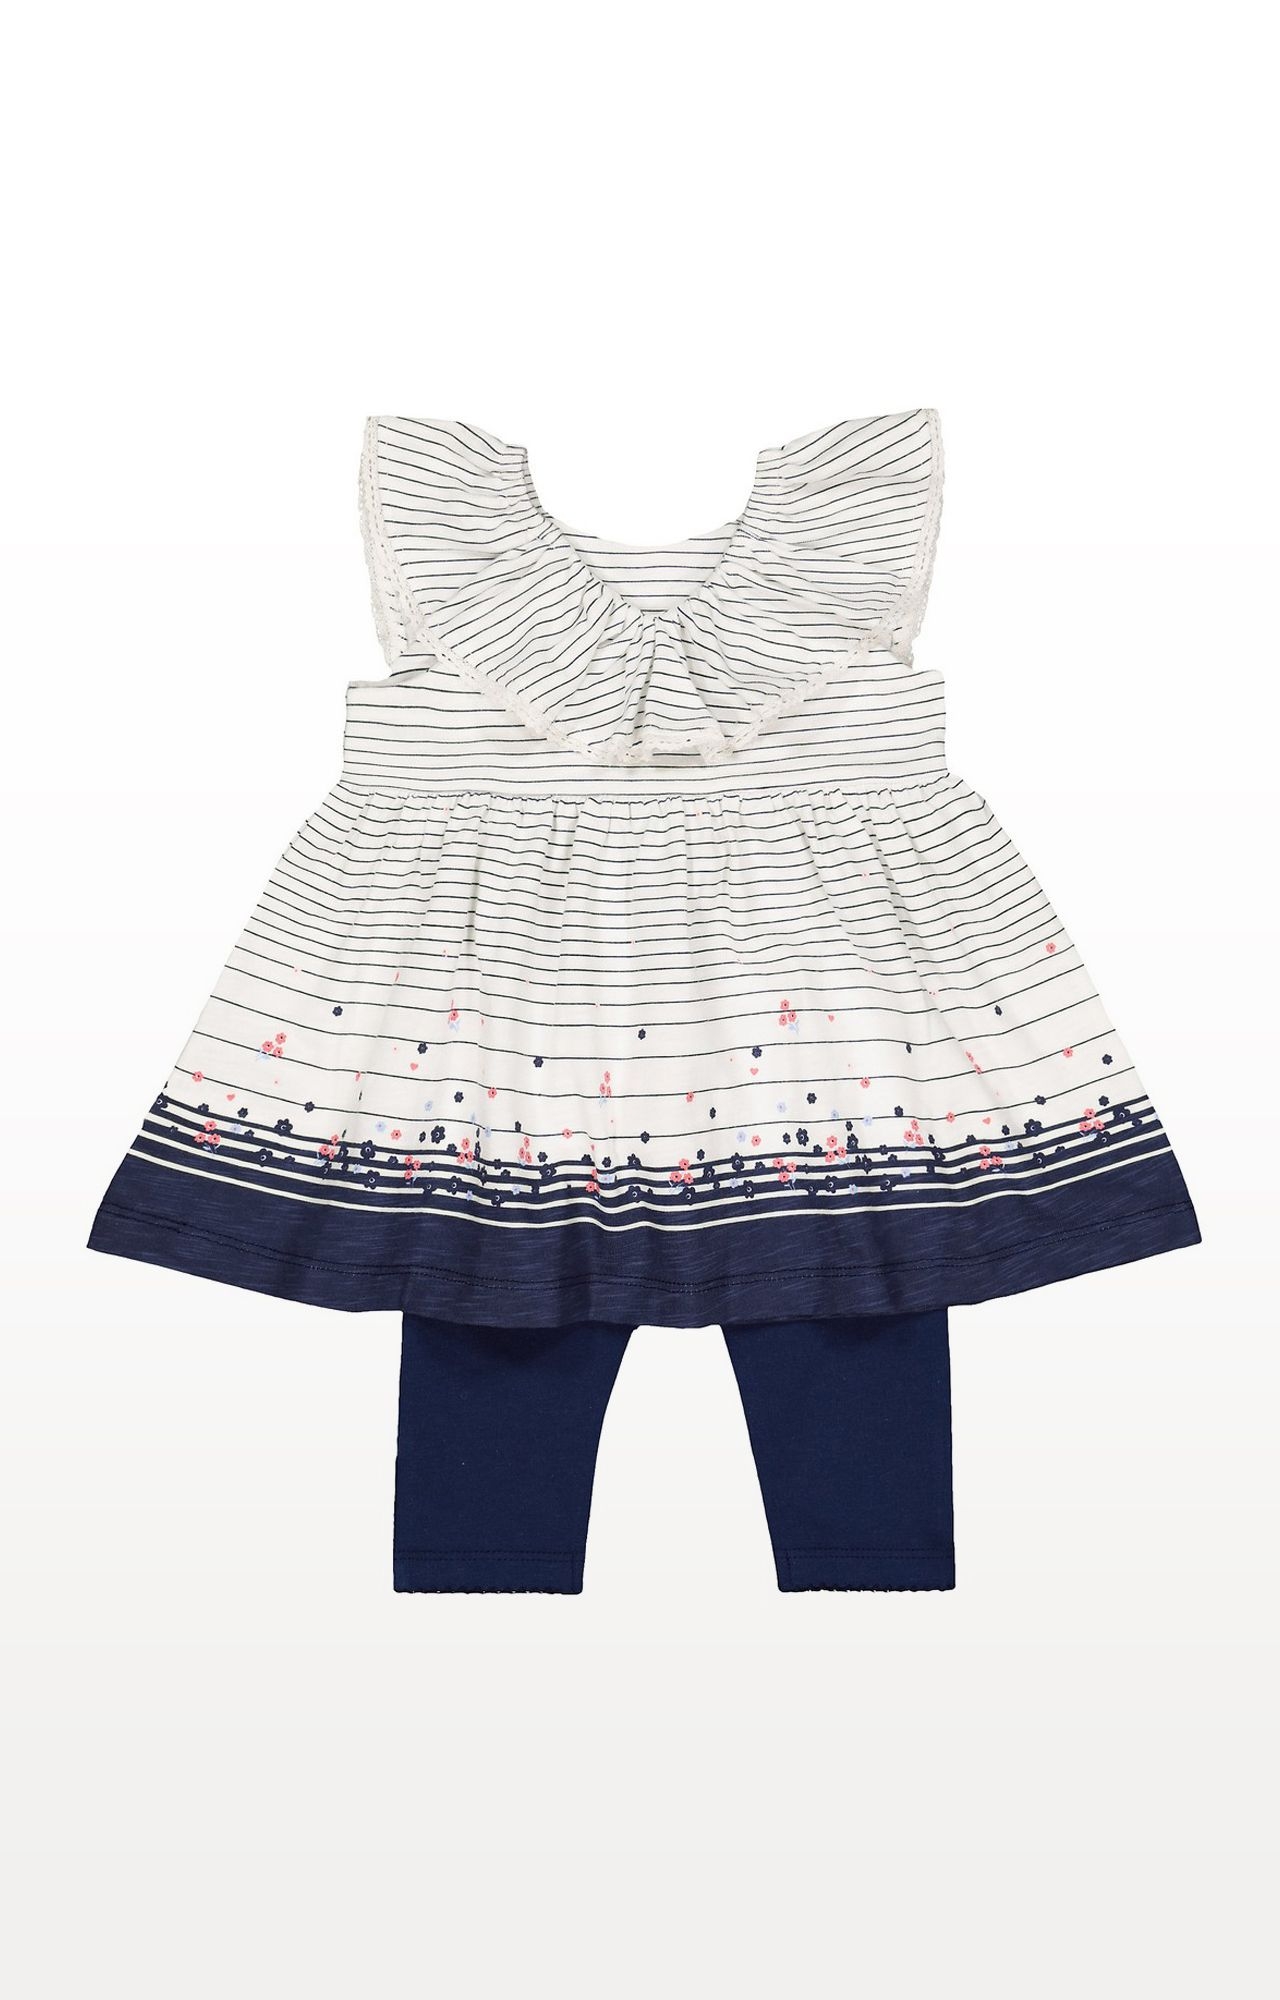 Mothercare | Navy Striped Floral Dress and Navy Leggings Set